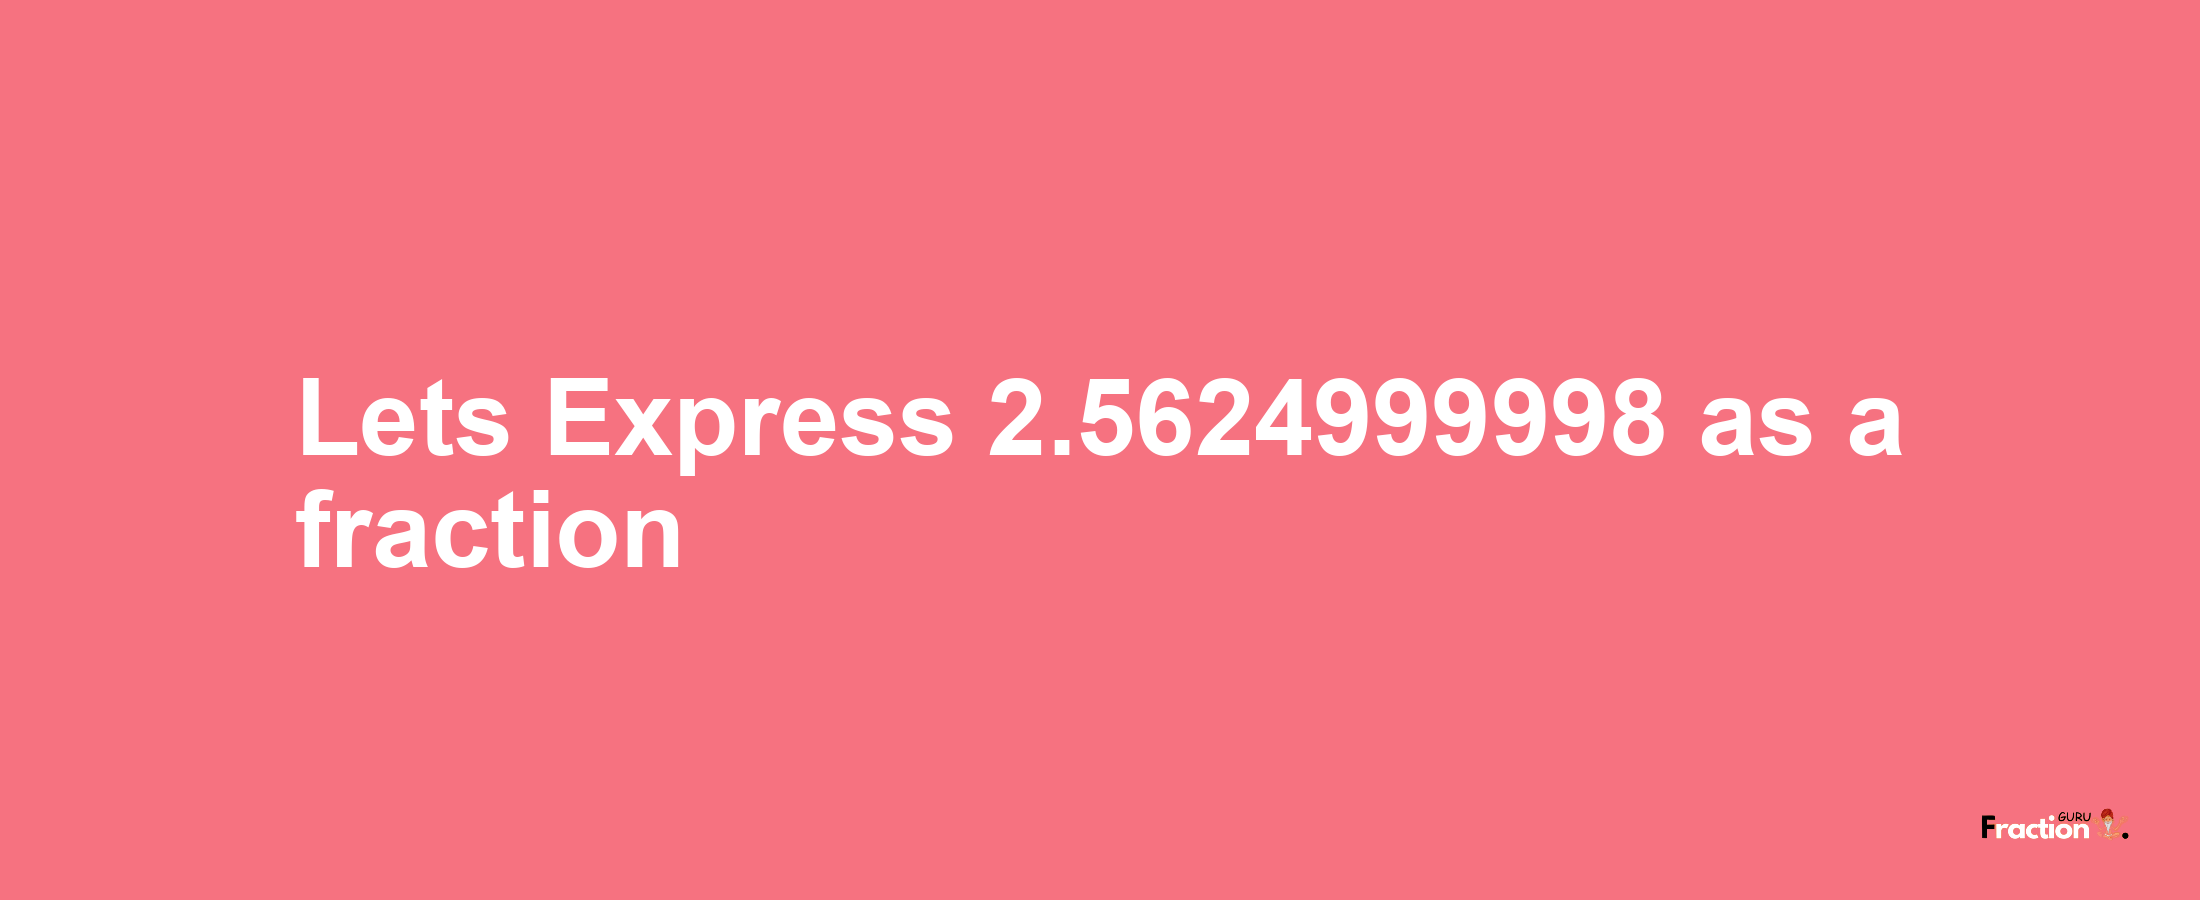 Lets Express 2.5624999998 as afraction